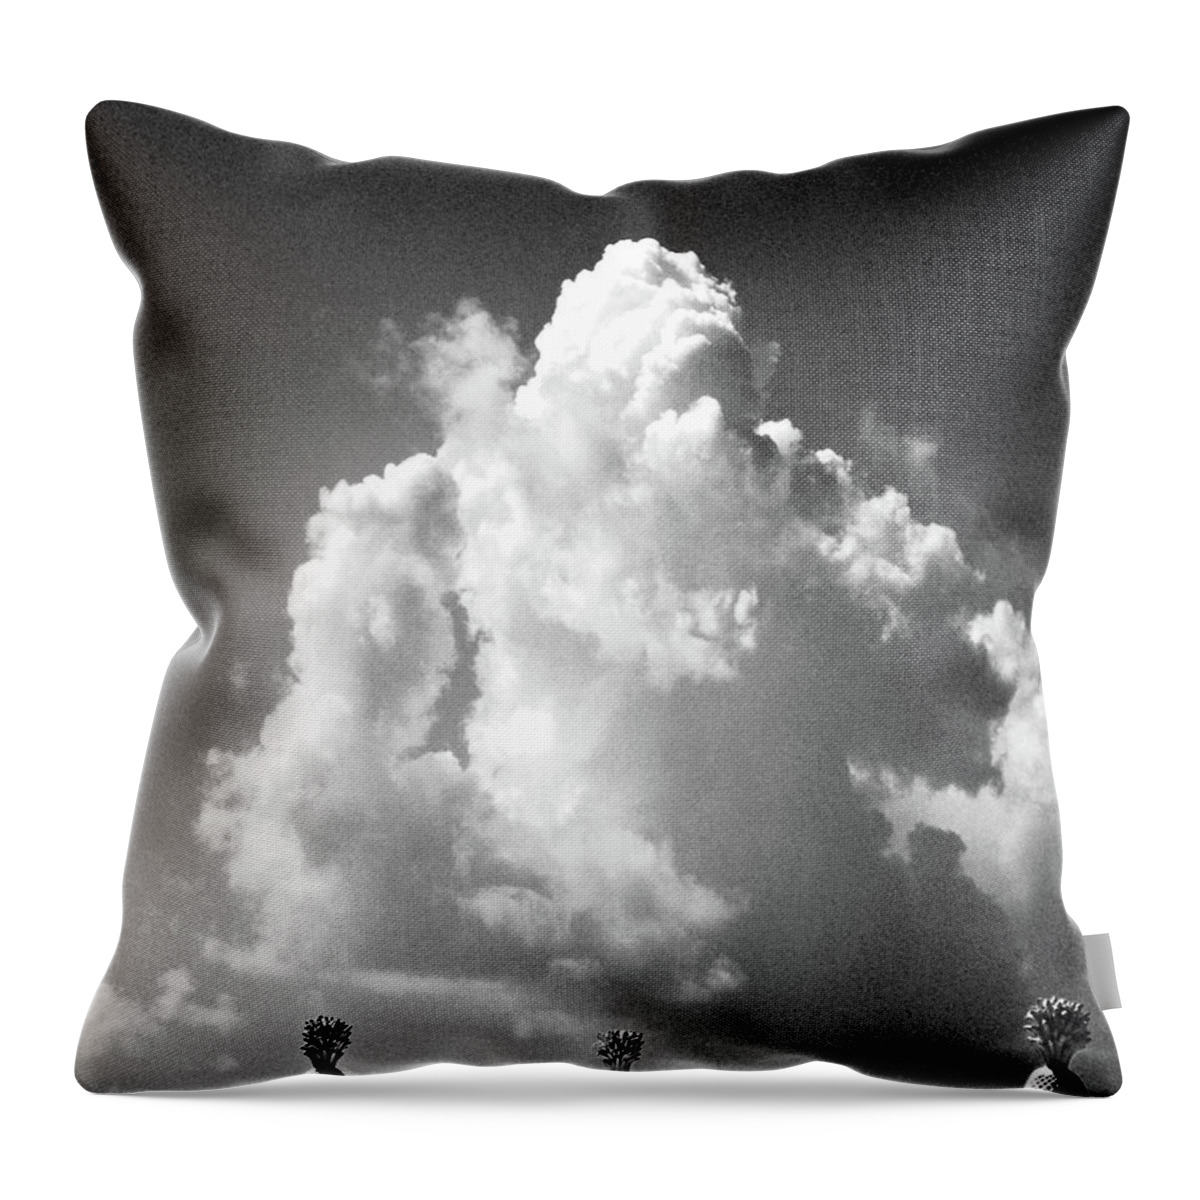 Cloud Throw Pillow featuring the photograph Monument by Lizi Beard-Ward